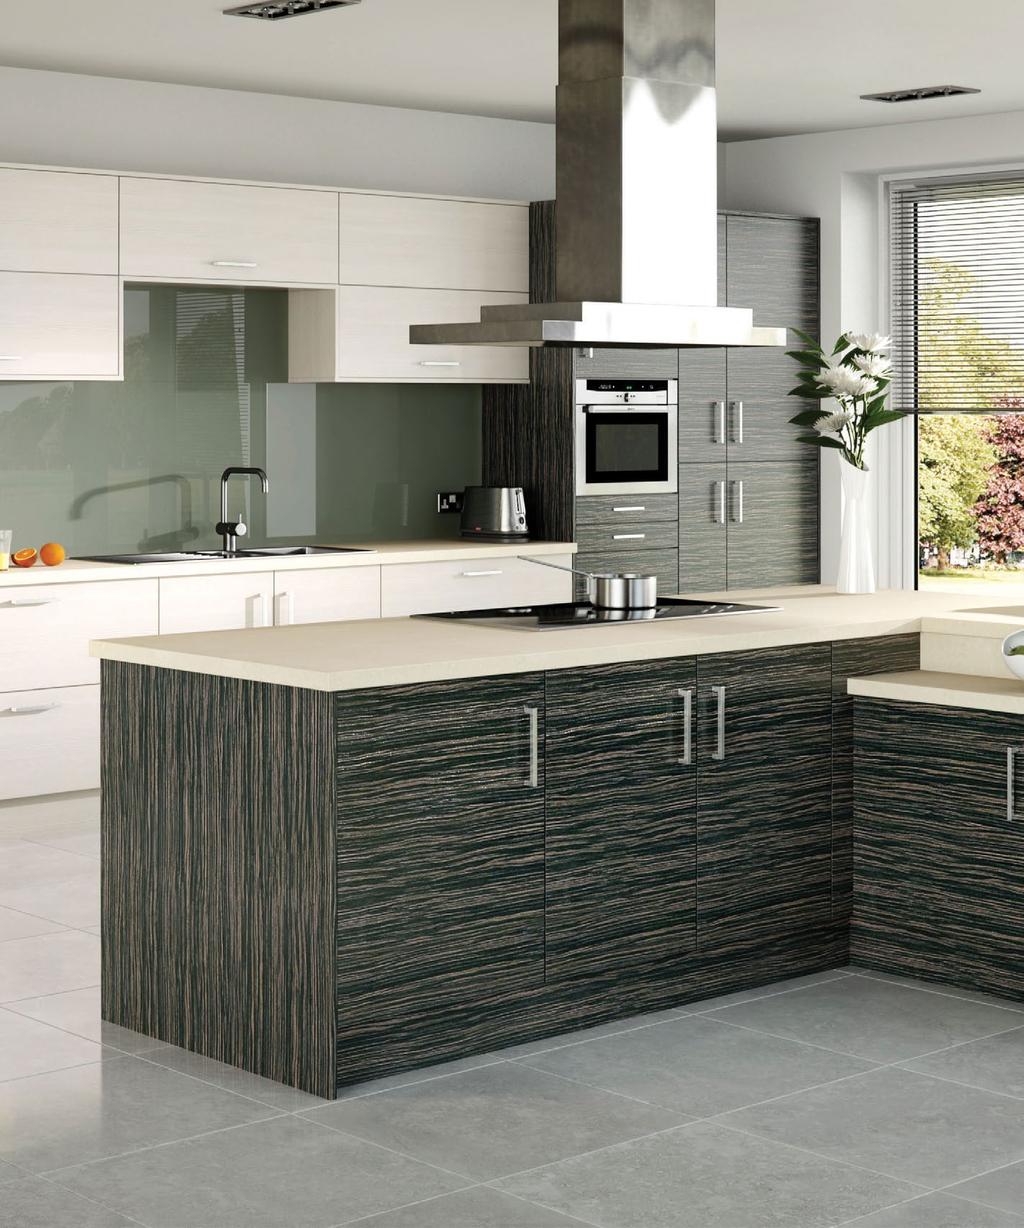 smart woodgrain finish with simple, contemporary lines.